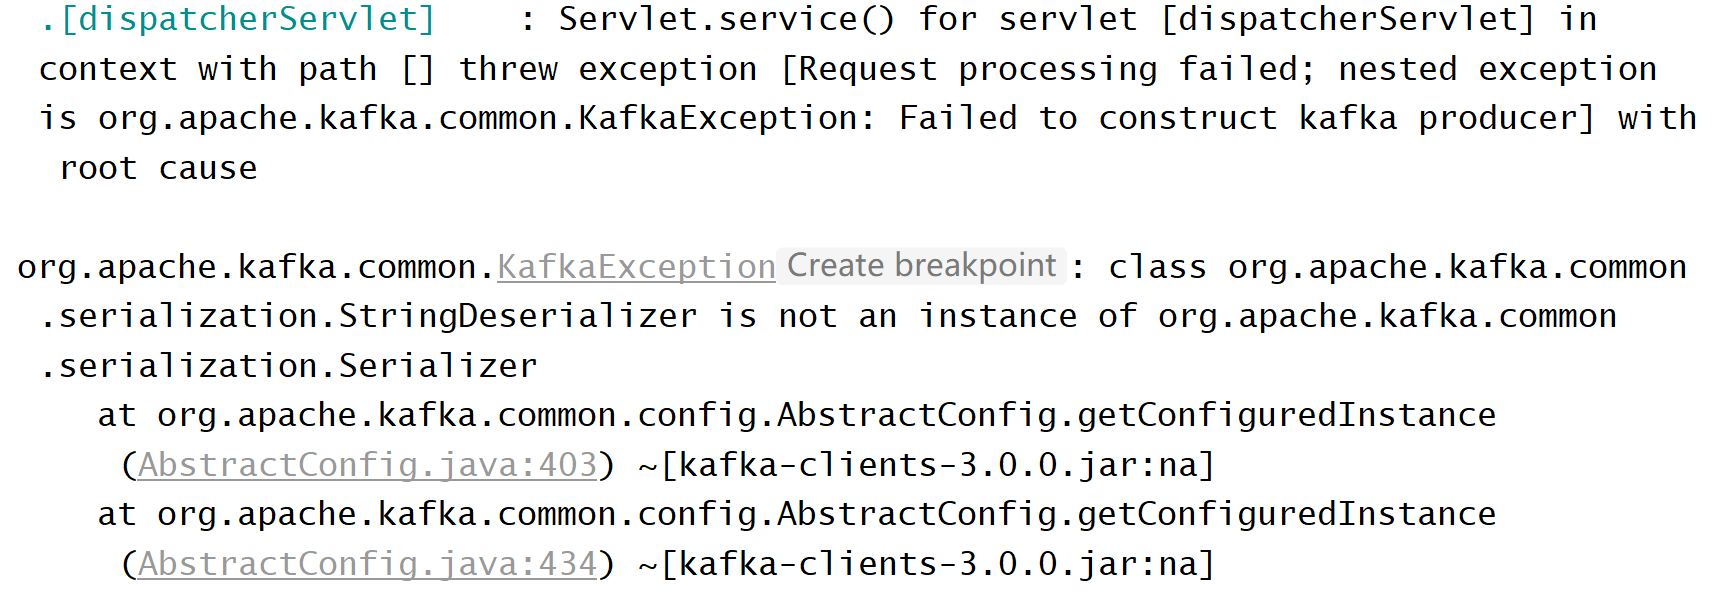 spring集成kafka运行时报错：Failed to construct kafka producer] with root cause